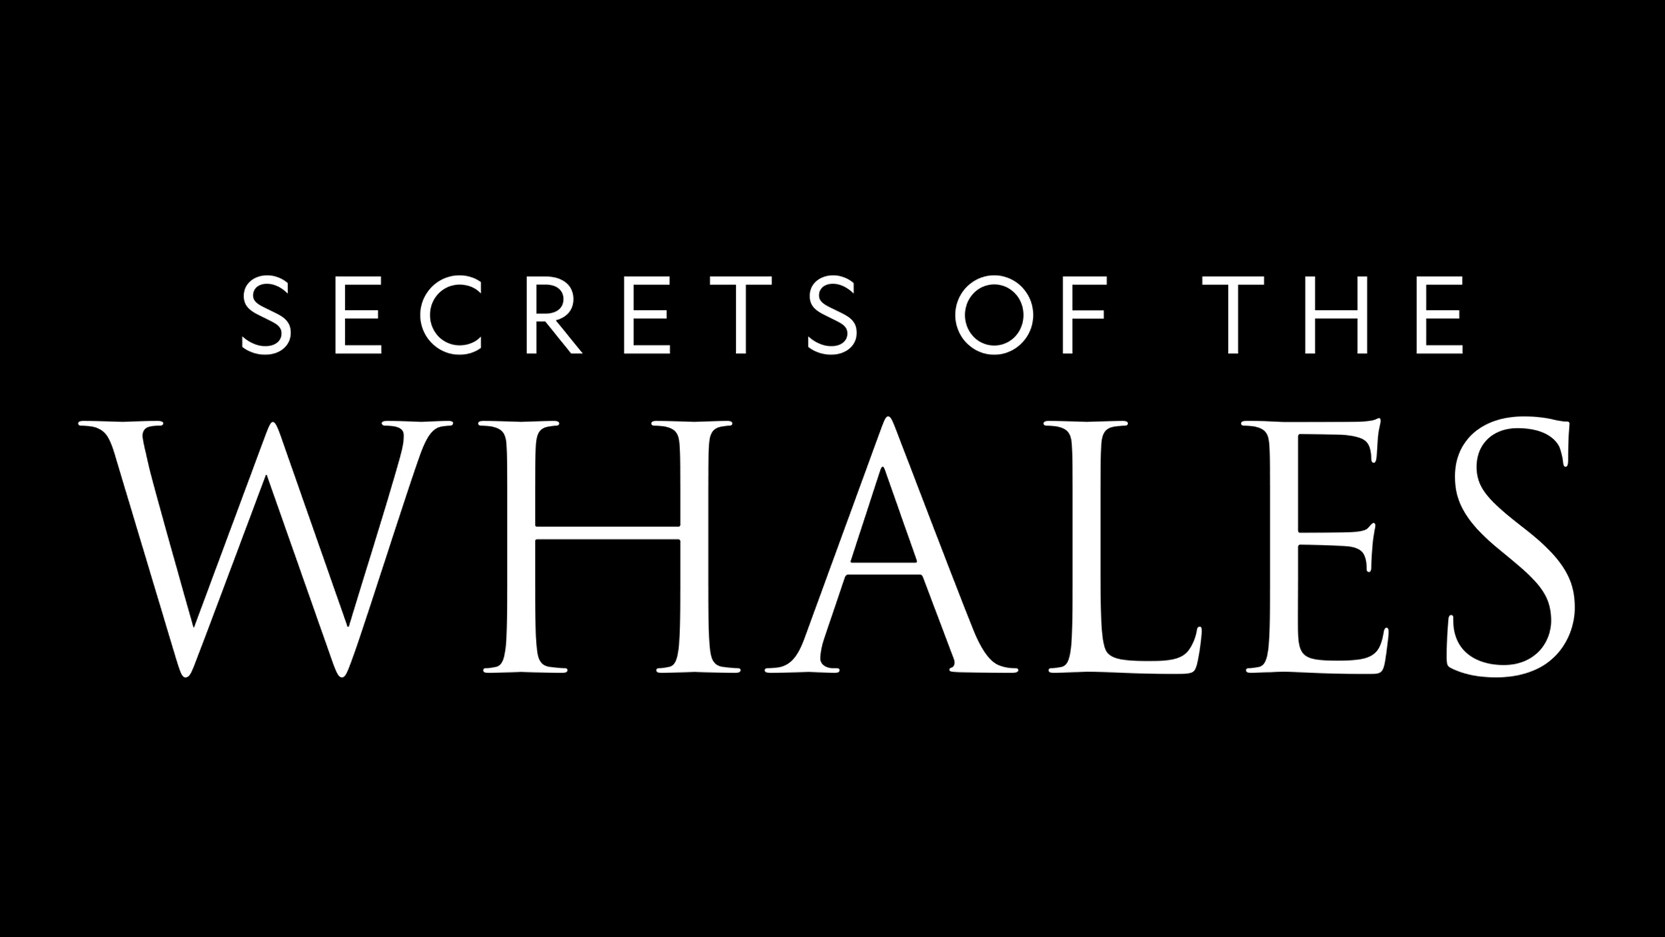 Disney+ reveals The Mysterious and Beautiful World of Whales in newly released trailer for its original series ‘Secrets of the Whales’